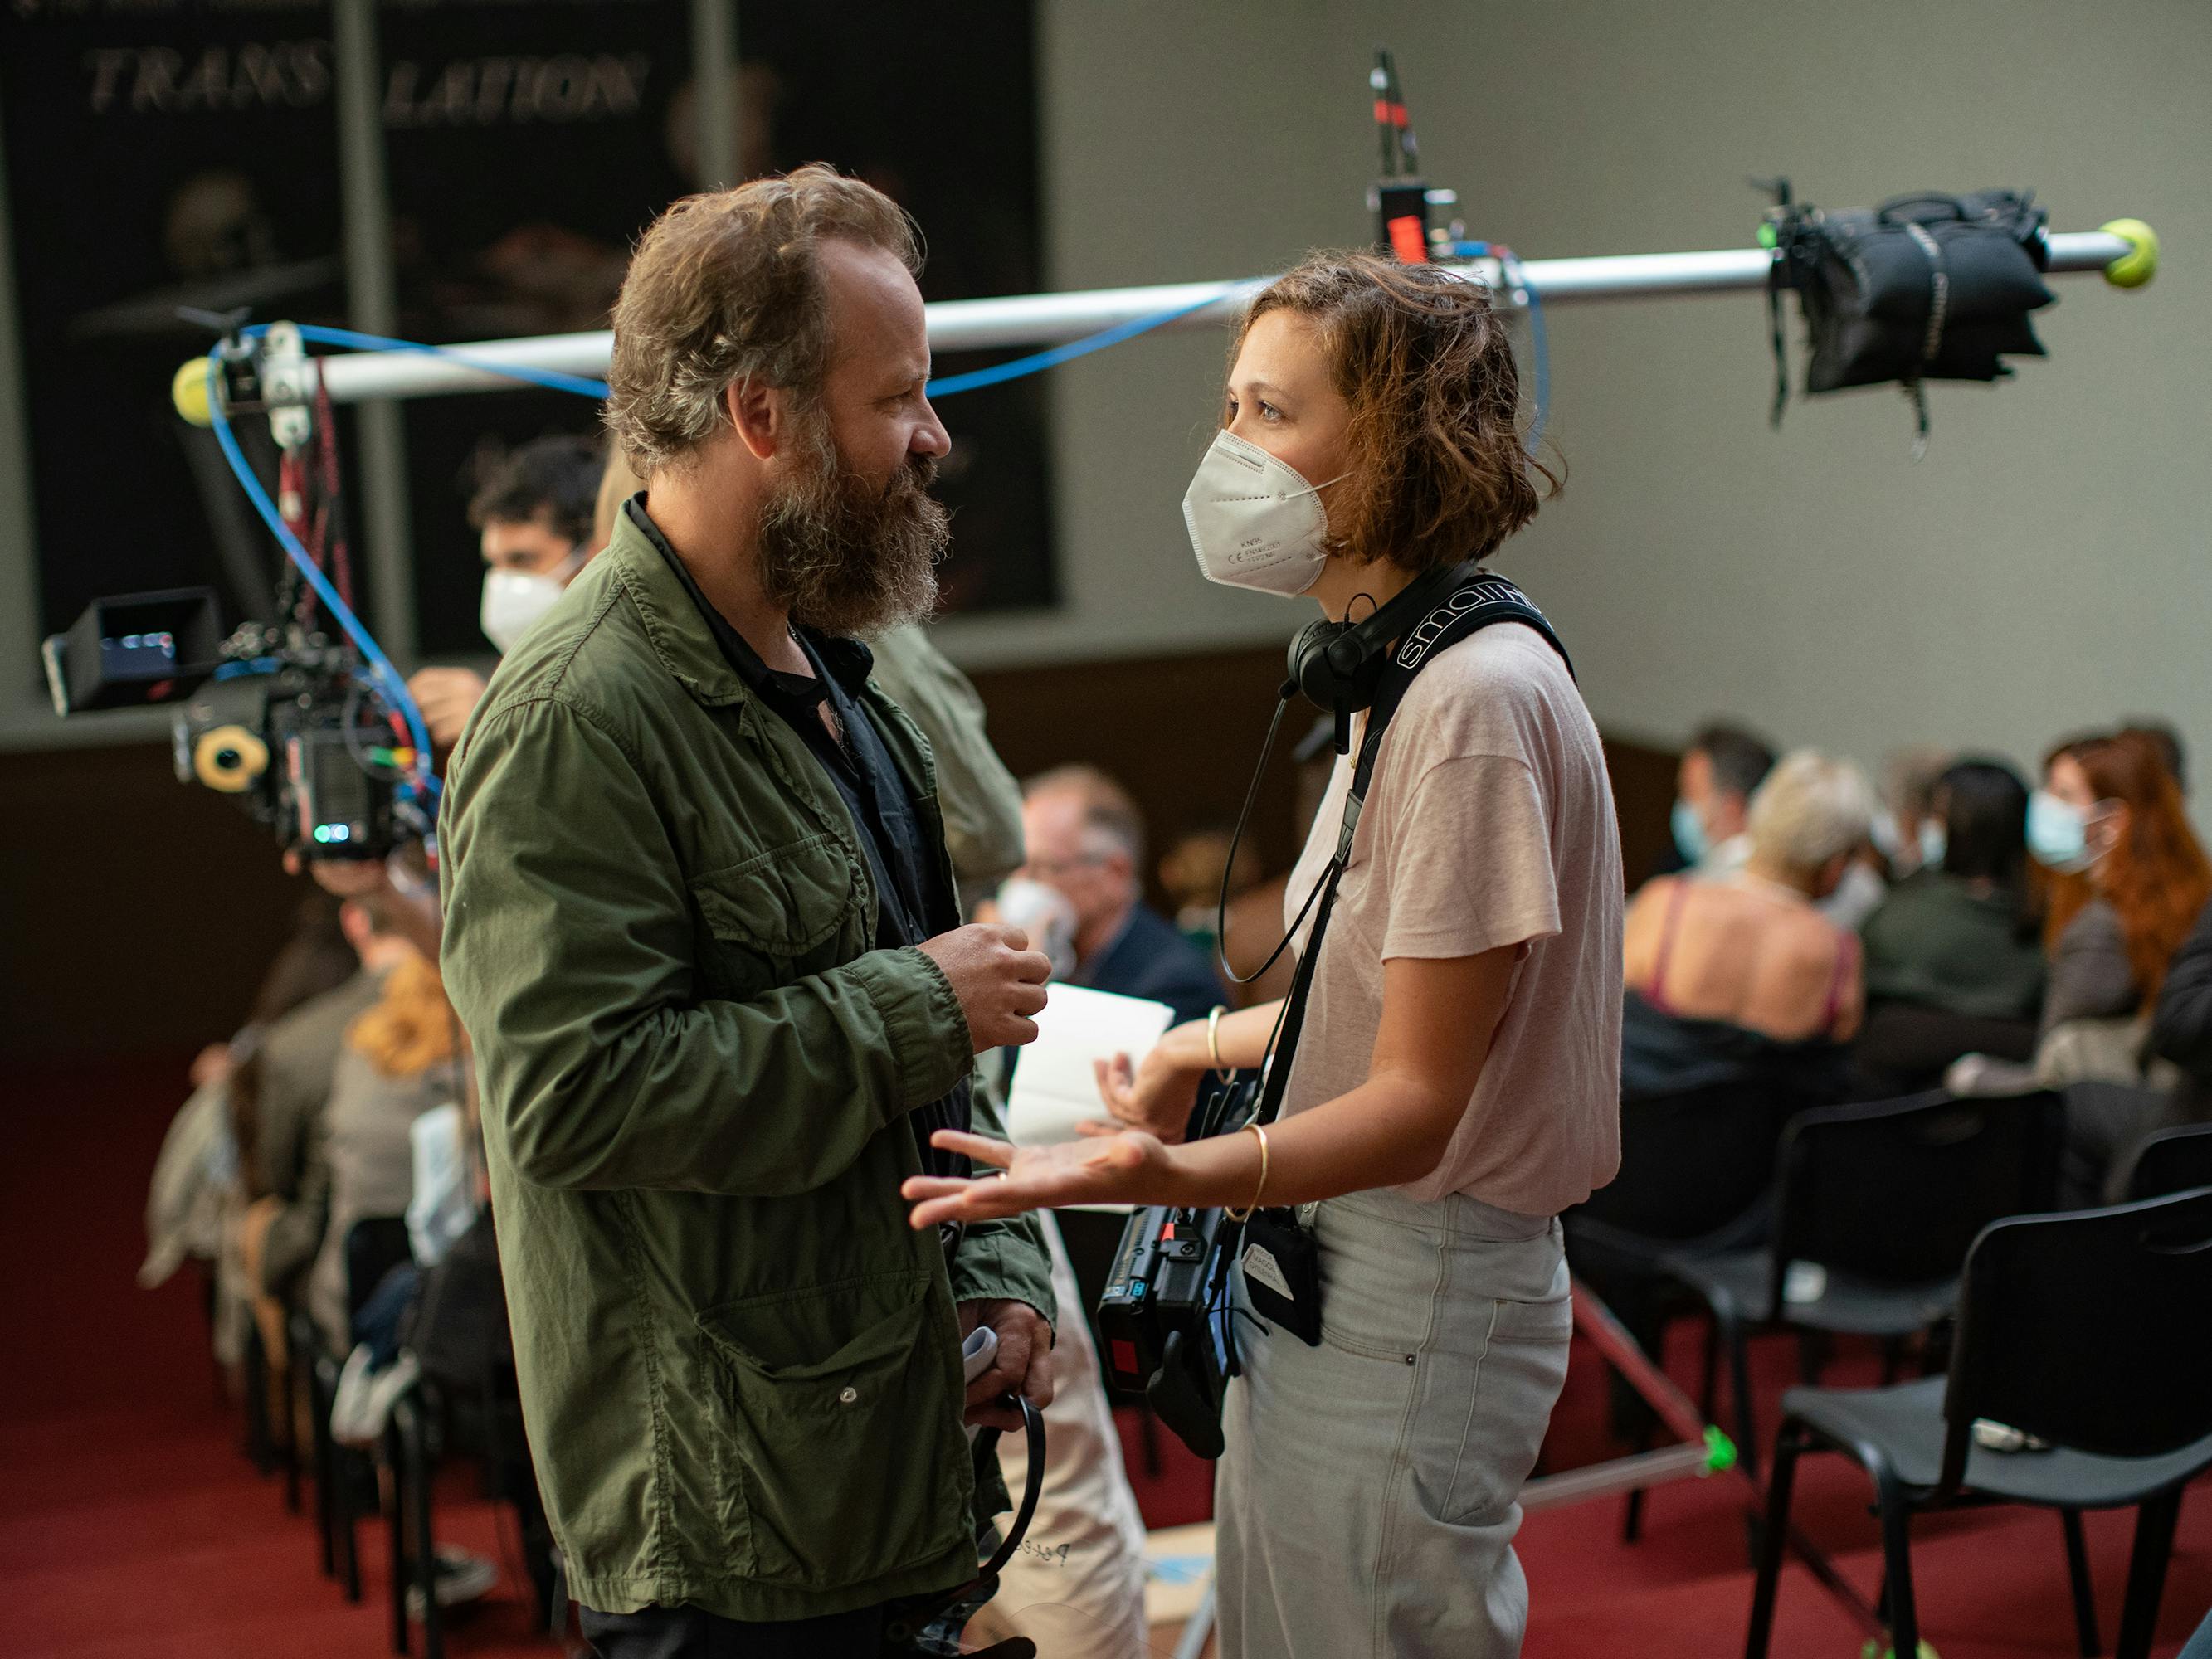 Peter Sarsgaard and Maggie Gyllenhaal stand among equipment and black plastic chairs. Sarsgaard wears a green jacket and Gyllenhaal wears khakis and a pink shirt.  